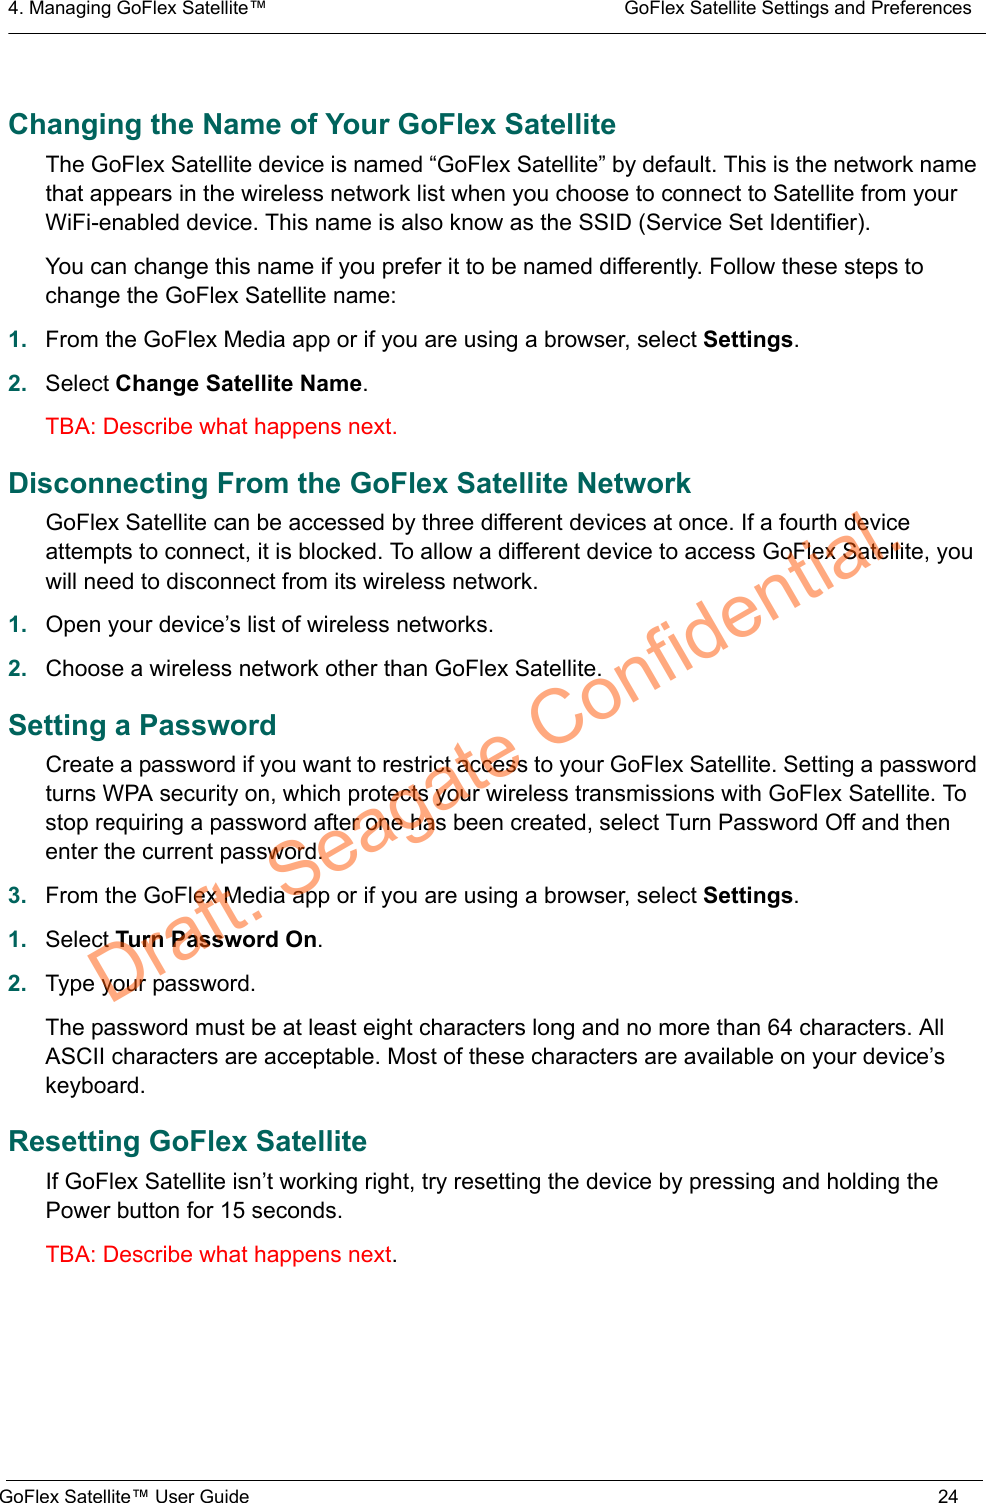 4. Managing GoFlex Satellite™  GoFlex Satellite Settings and PreferencesGoFlex Satellite™ User Guide 24Changing the Name of Your GoFlex SatelliteThe GoFlex Satellite device is named “GoFlex Satellite” by default. This is the network name that appears in the wireless network list when you choose to connect to Satellite from your WiFi-enabled device. This name is also know as the SSID (Service Set Identifier).You can change this name if you prefer it to be named differently. Follow these steps to change the GoFlex Satellite name:1. From the GoFlex Media app or if you are using a browser, select Settings.2. Select Change Satellite Name.TBA: Describe what happens next.Disconnecting From the GoFlex Satellite NetworkGoFlex Satellite can be accessed by three different devices at once. If a fourth device attempts to connect, it is blocked. To allow a different device to access GoFlex Satellite, you will need to disconnect from its wireless network.1. Open your device’s list of wireless networks.2. Choose a wireless network other than GoFlex Satellite.Setting a PasswordCreate a password if you want to restrict access to your GoFlex Satellite. Setting a password turns WPA security on, which protects your wireless transmissions with GoFlex Satellite. To stop requiring a password after one has been created, select Turn Password Off and then enter the current password.3. From the GoFlex Media app or if you are using a browser, select Settings.1. Select Turn Password On.2. Type your password.The password must be at least eight characters long and no more than 64 characters. All ASCII characters are acceptable. Most of these characters are available on your device’s keyboard.Resetting GoFlex SatelliteIf GoFlex Satellite isn’t working right, try resetting the device by pressing and holding the Power button for 15 seconds.TBA: Describe what happens next.Draft. Seagate Confidential.